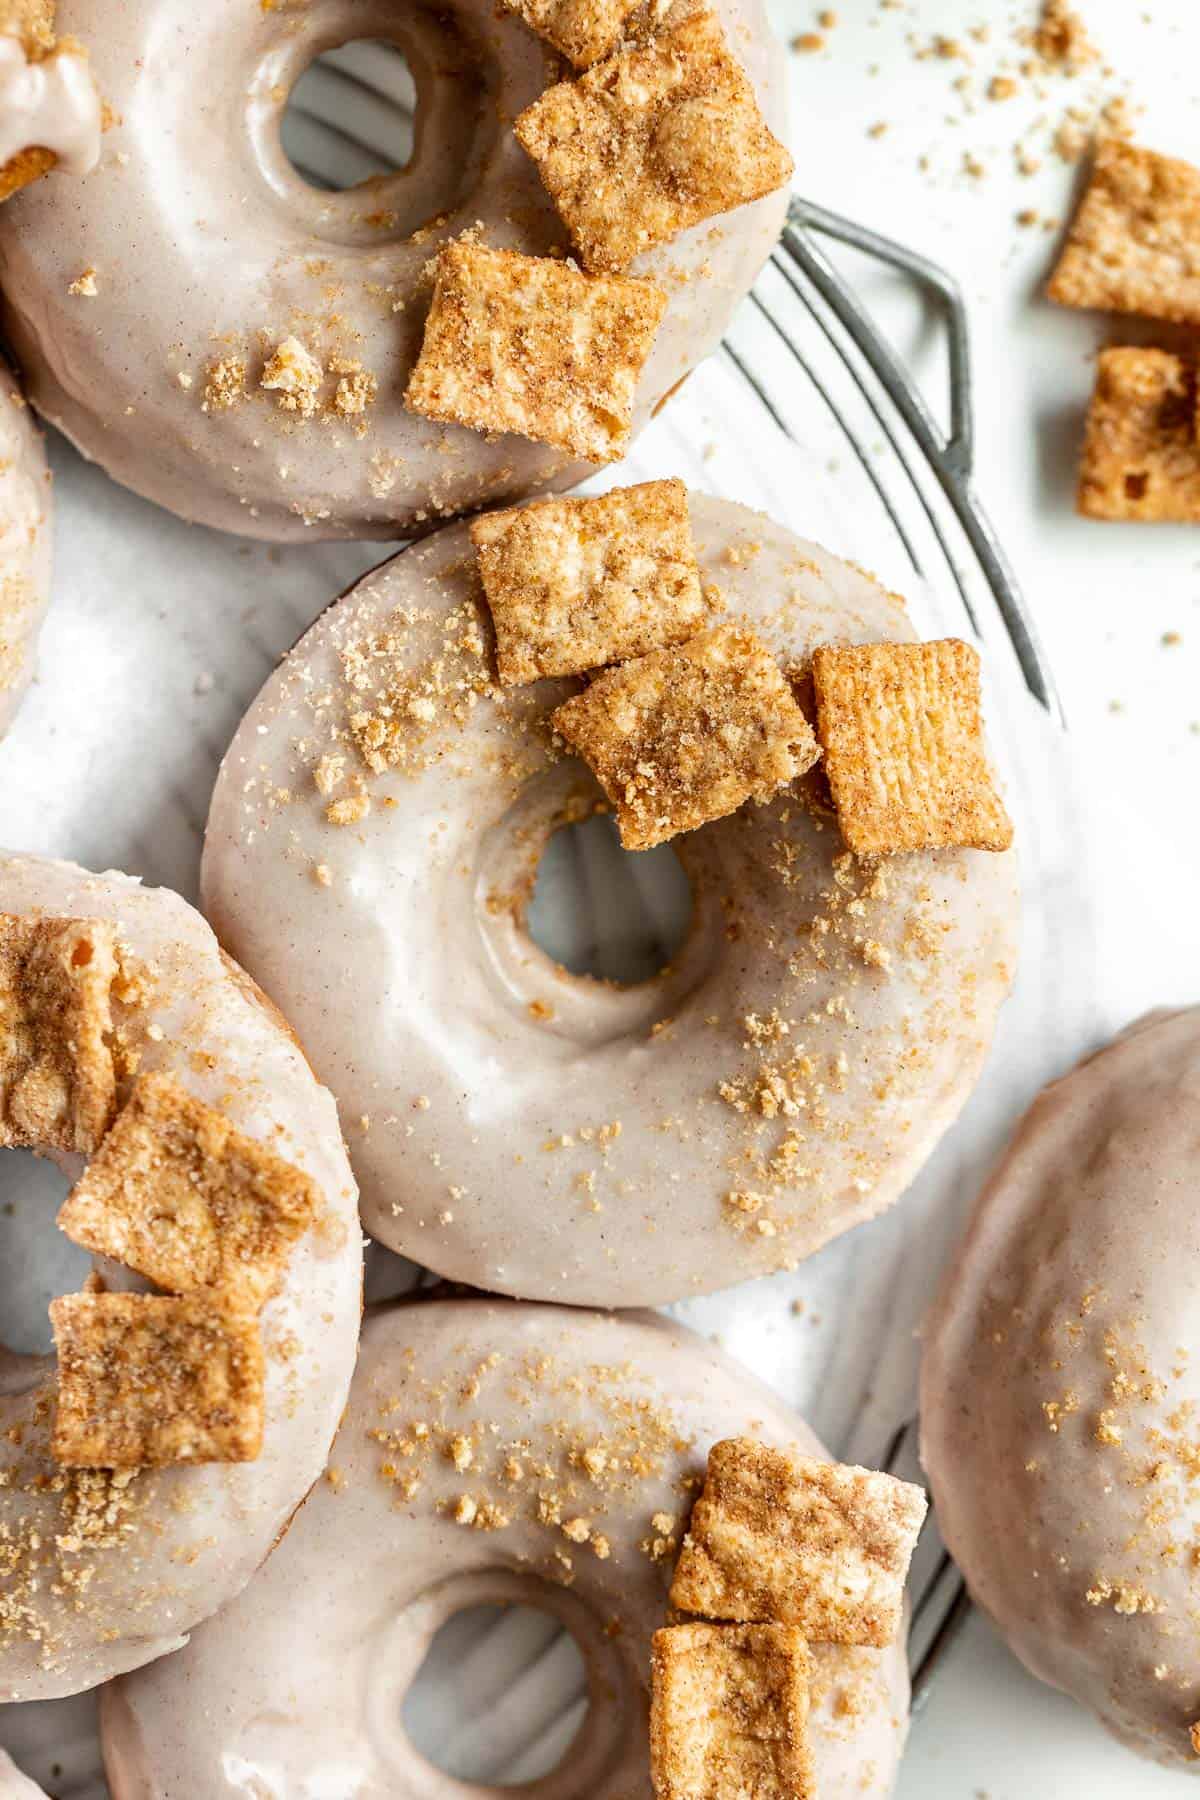 Decorated Cinnamon Toast Crunch donuts.